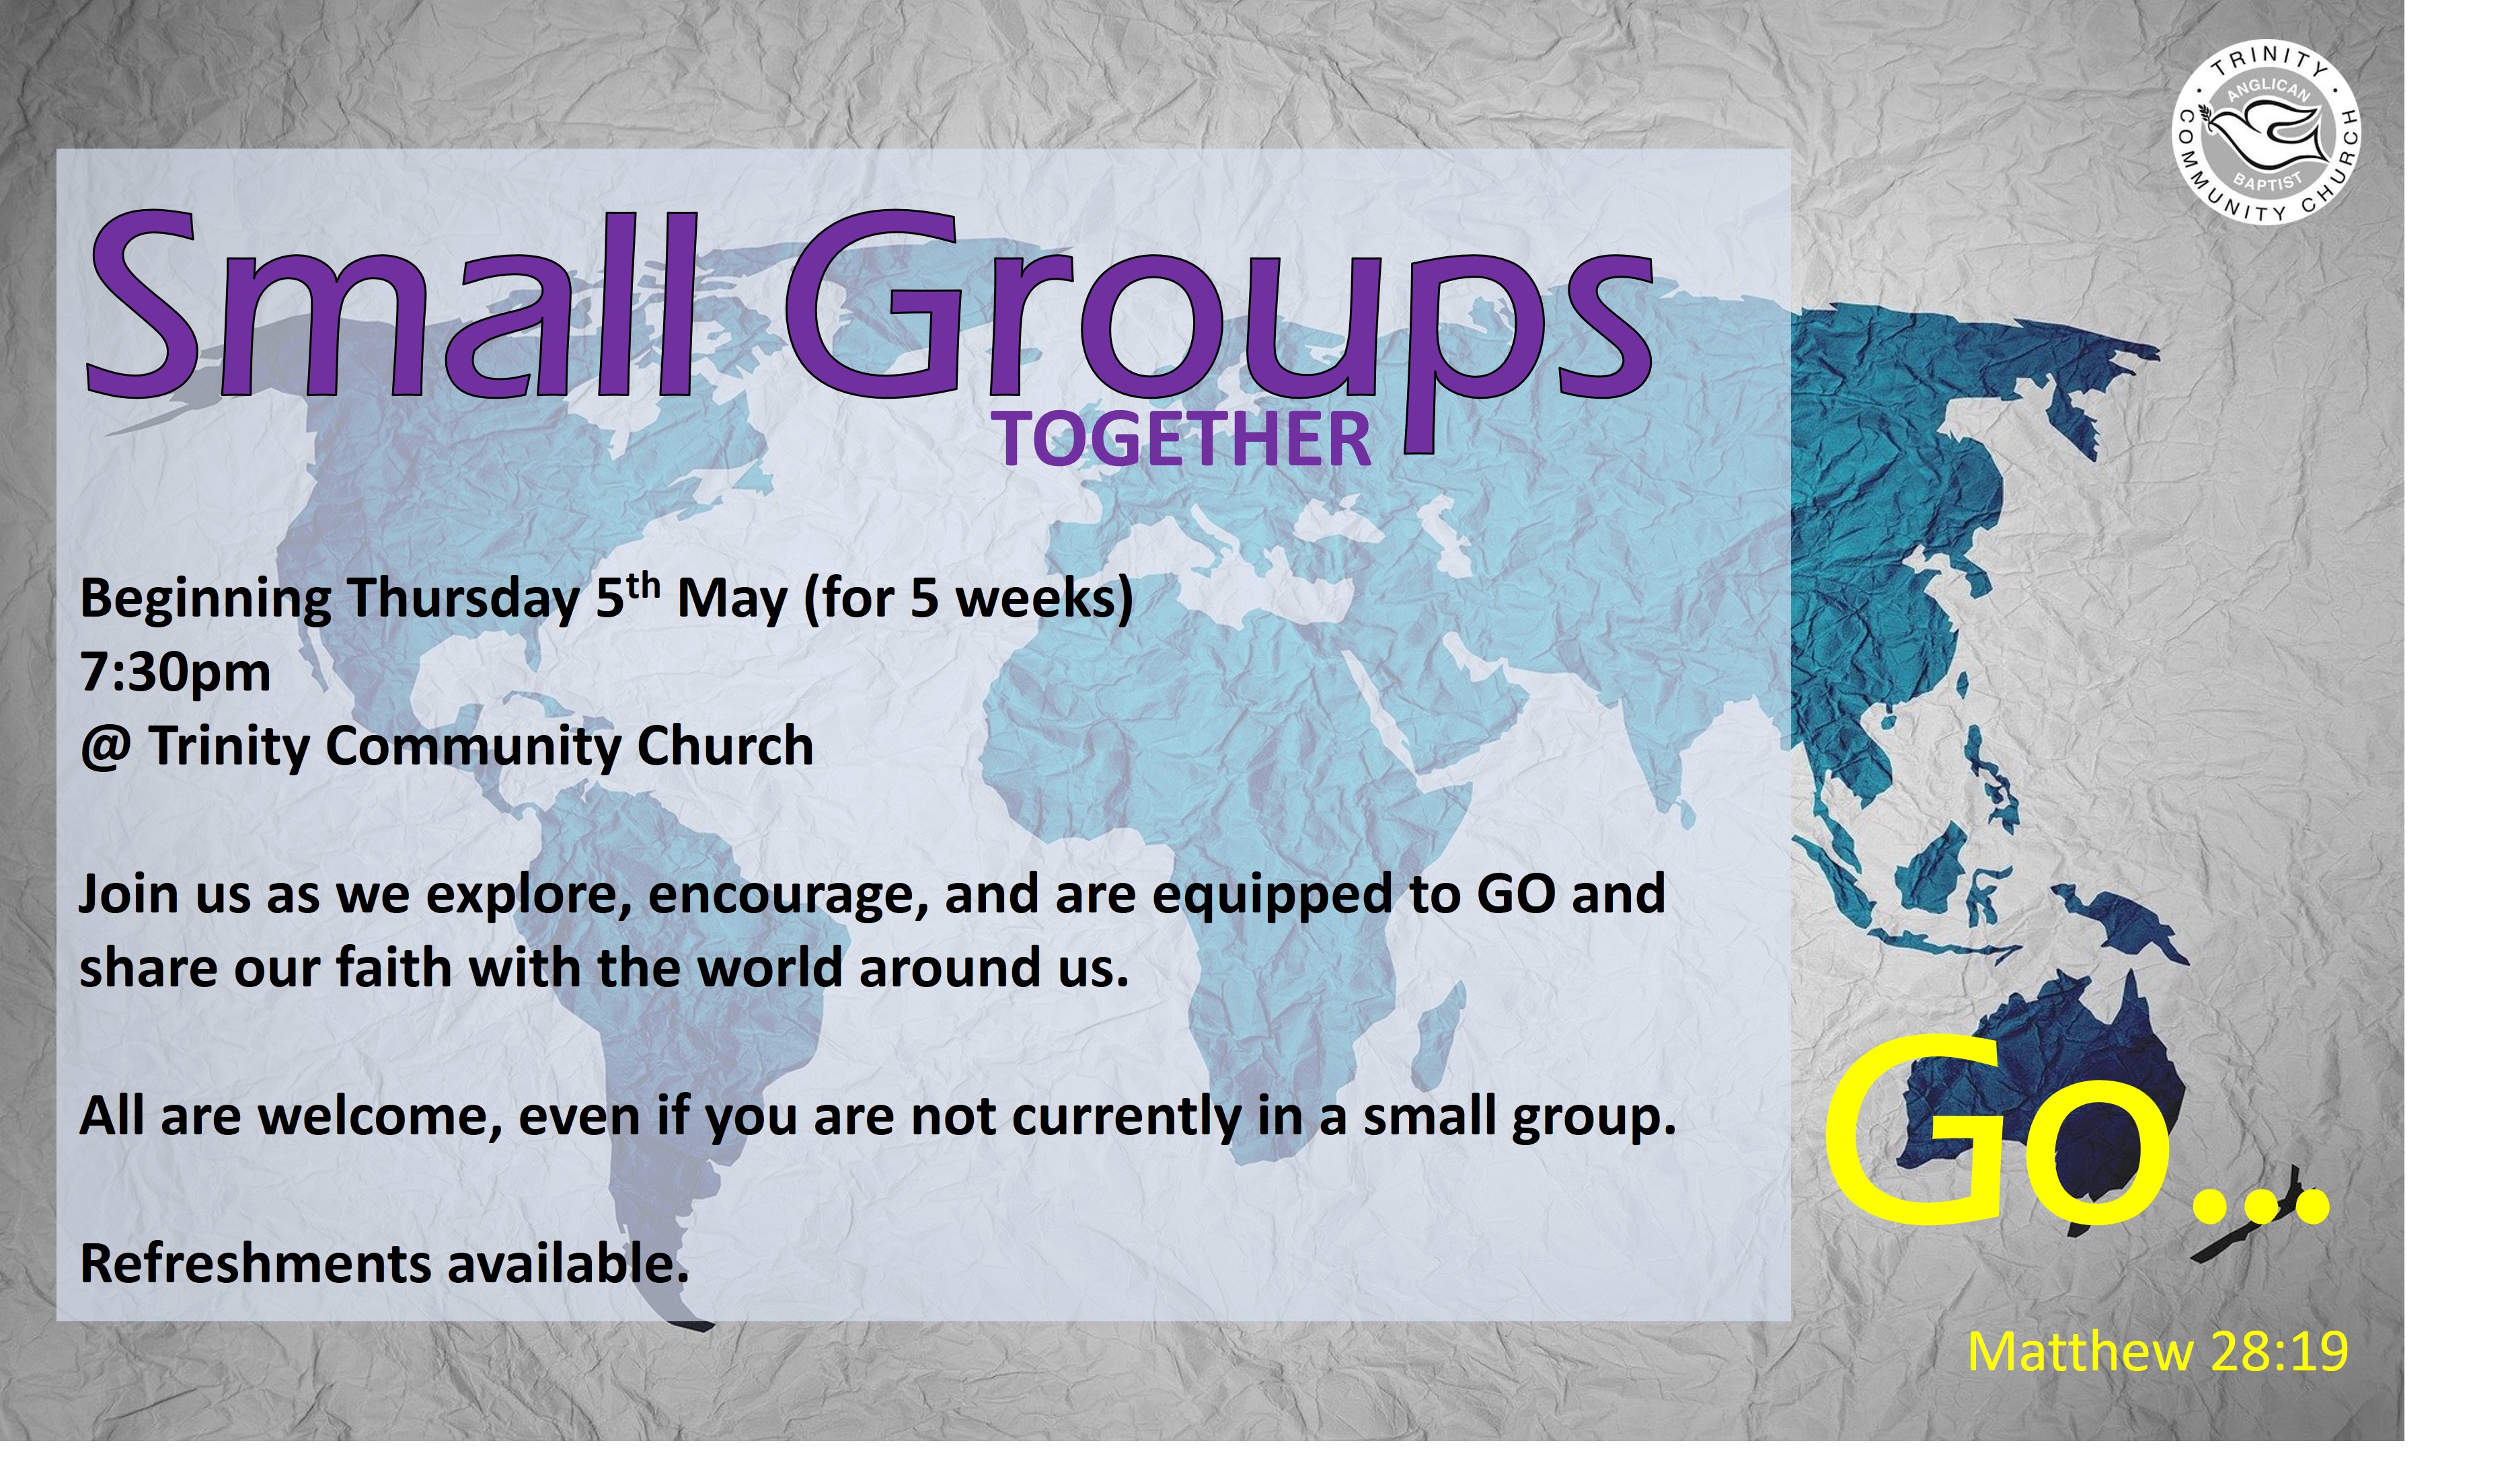 small groups together - Advert